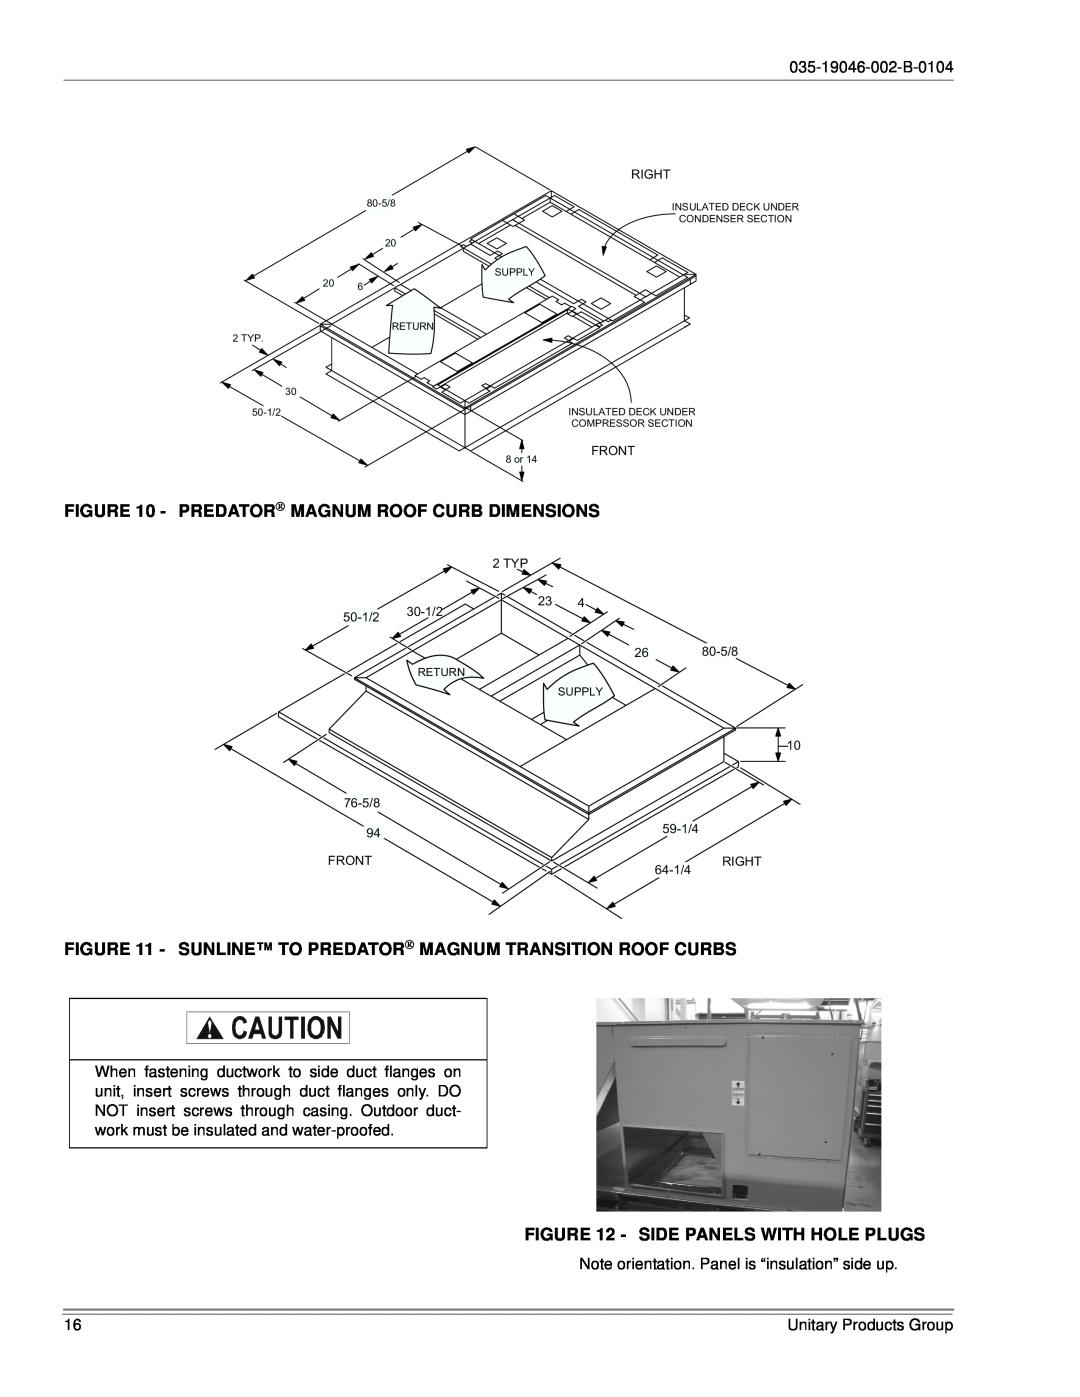 York DJ150 installation manual Predator Magnum Roof Curb Dimensions, Side Panels With Hole Plugs 